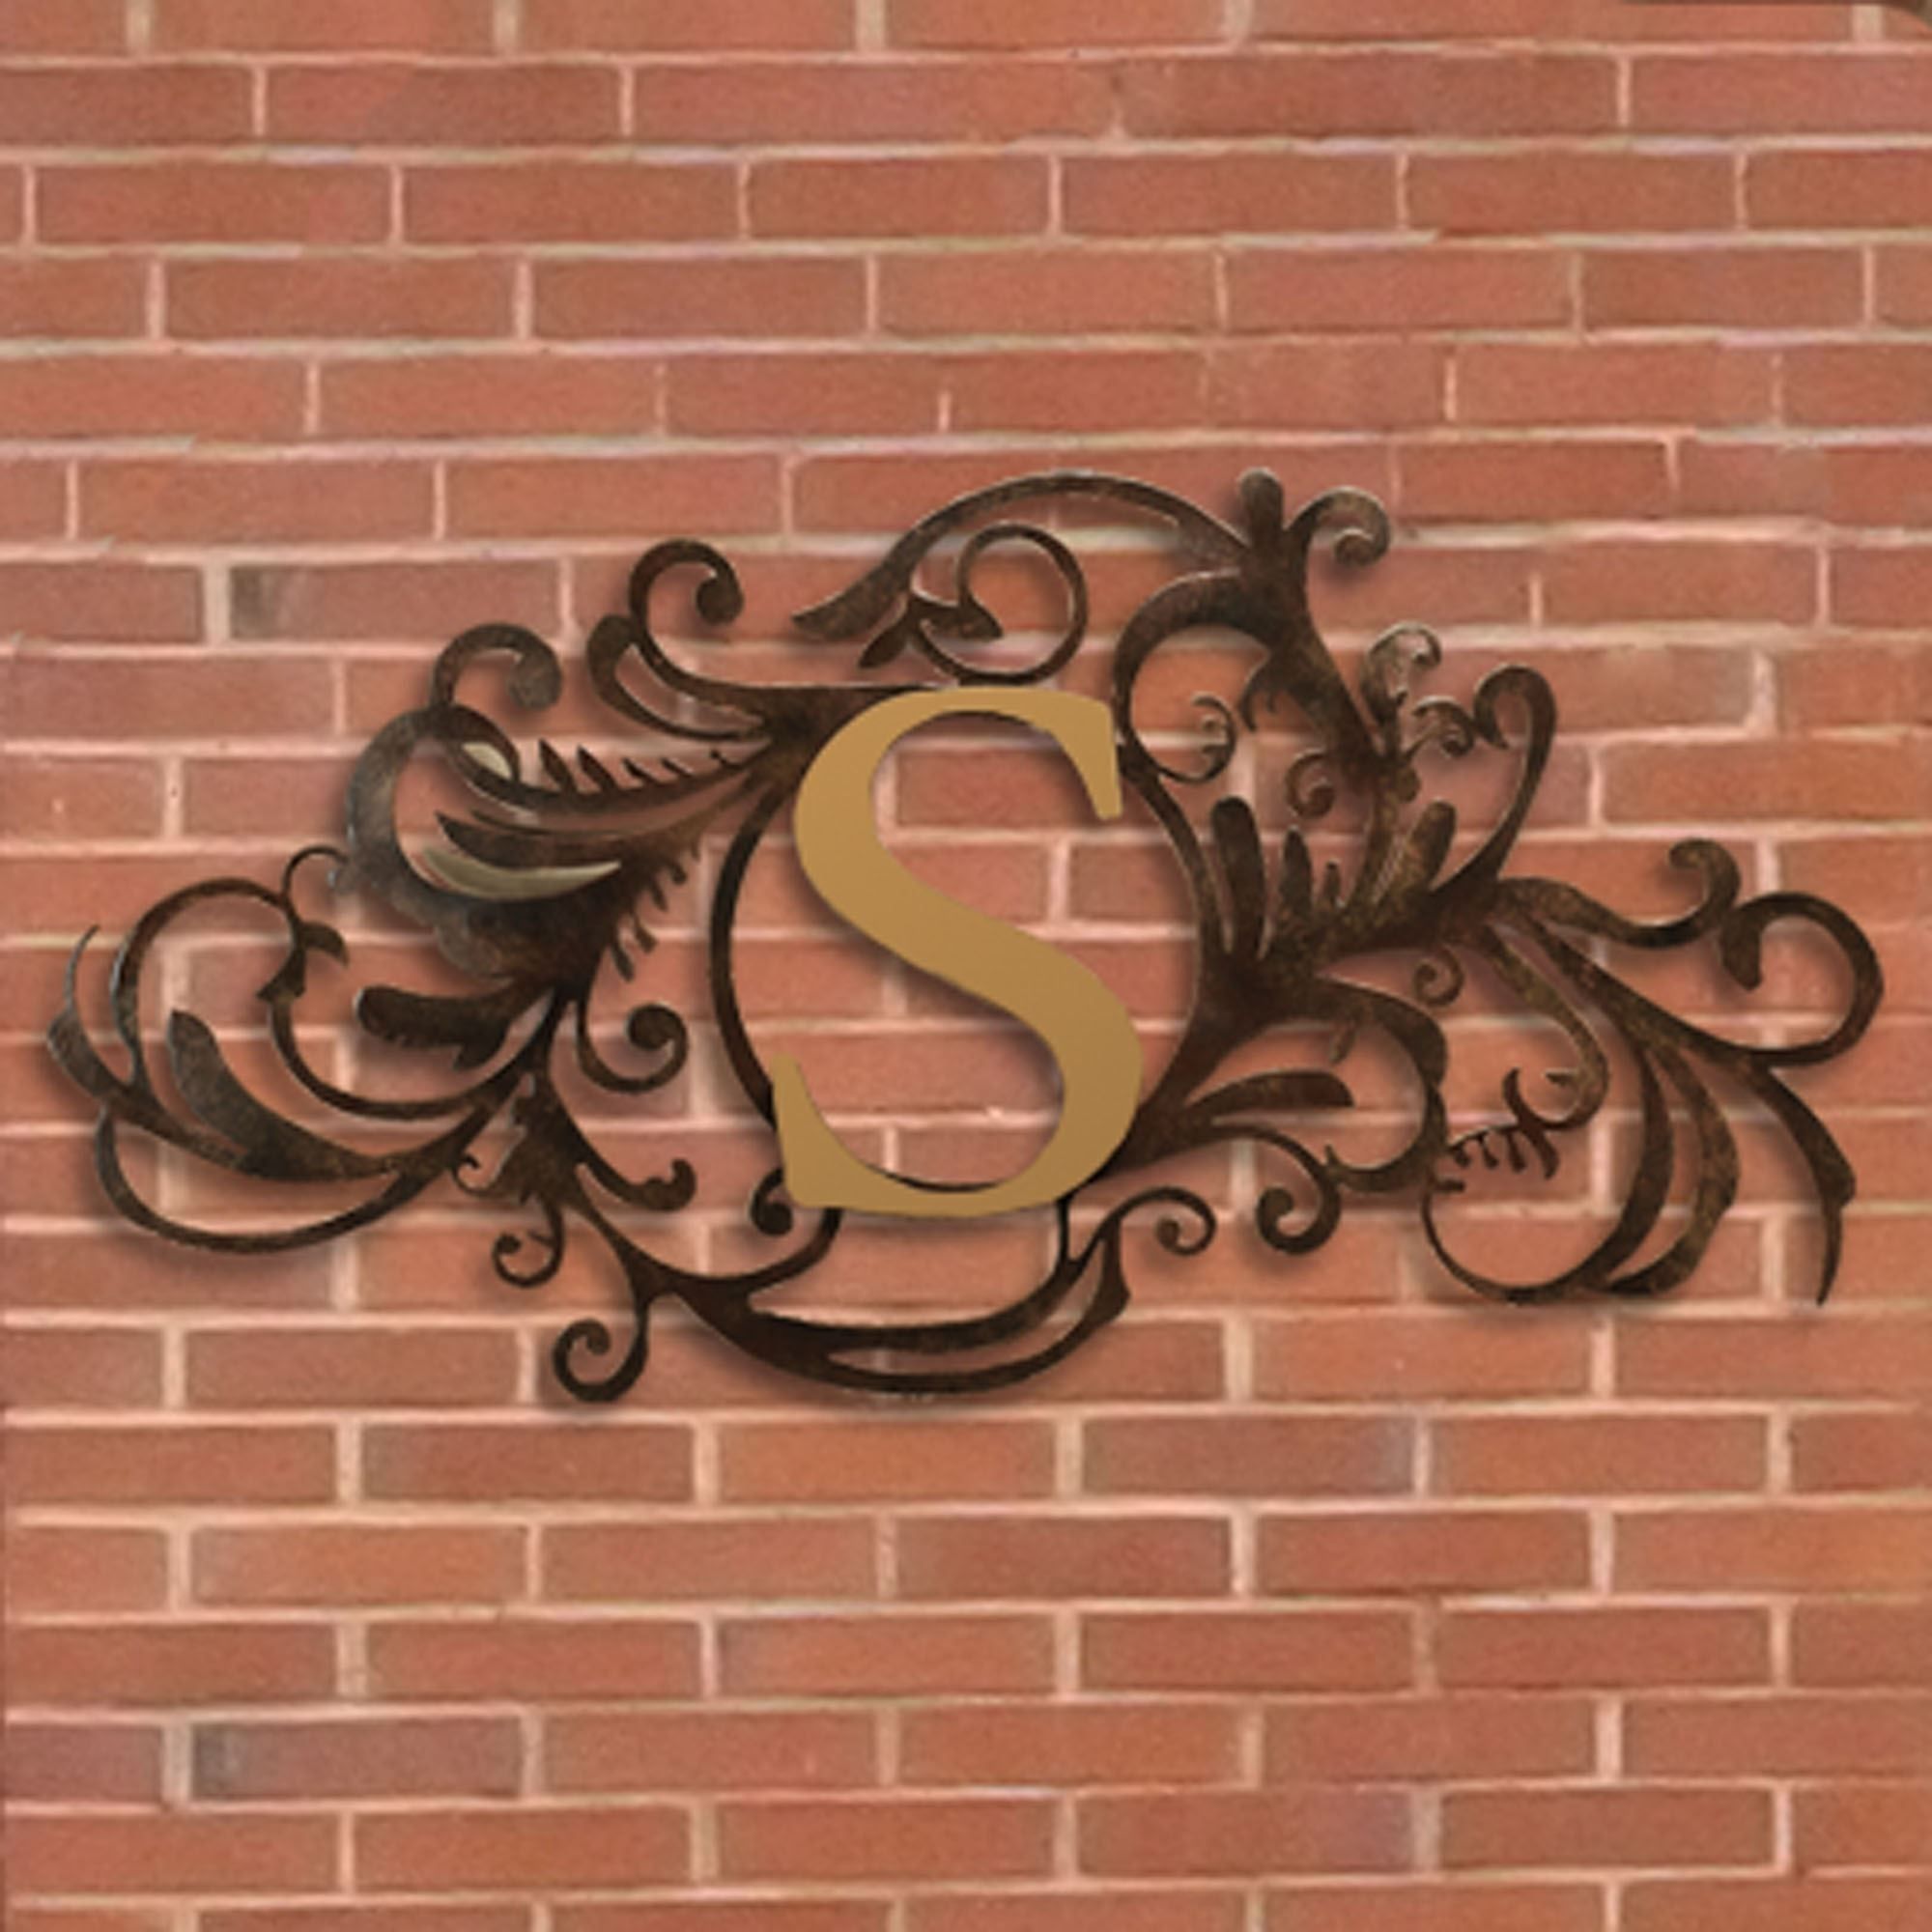 Evanston Indoor Outdoor Monogram Metal Wall Art Sign | Projects To Intended For Most Up To Date Metal Outdoor Wall Art (View 1 of 20)